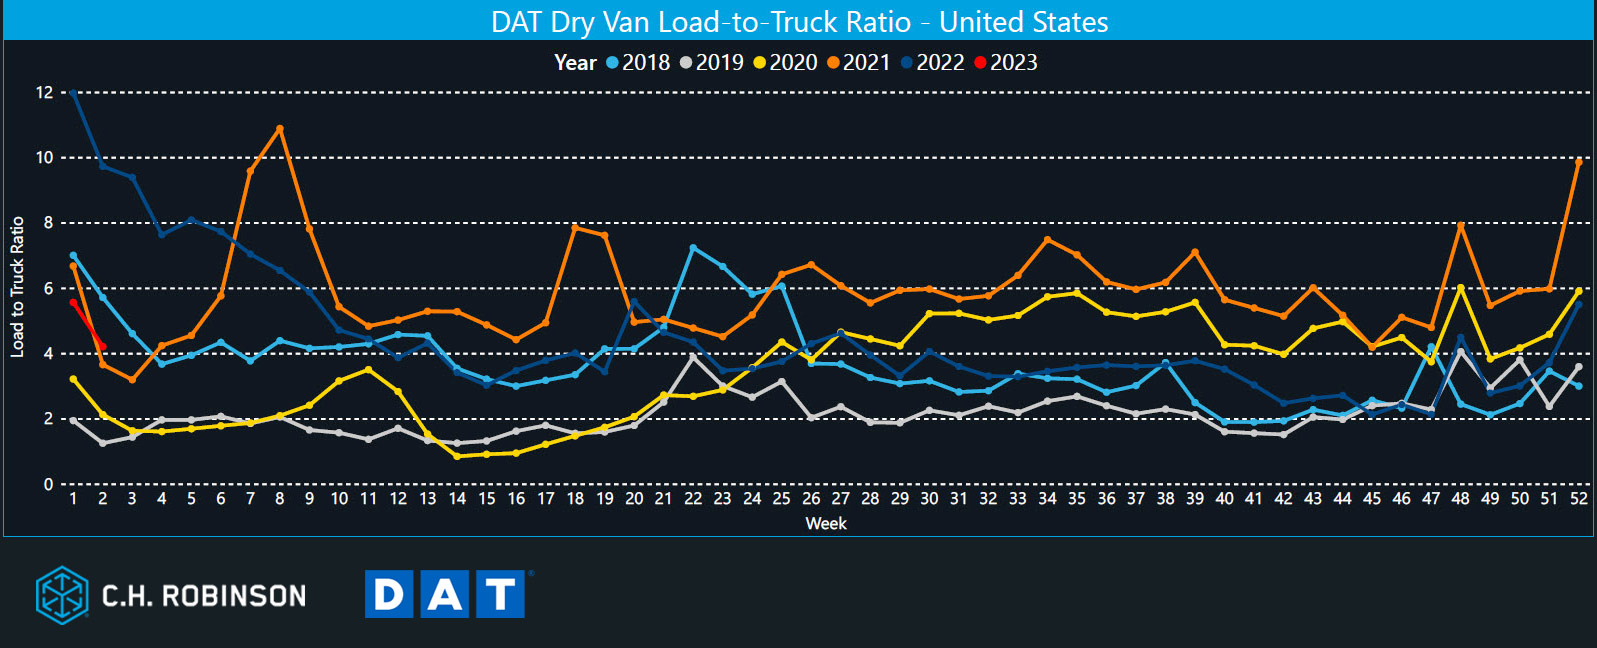 Dry Van load to truck ratio 5 year comparison 